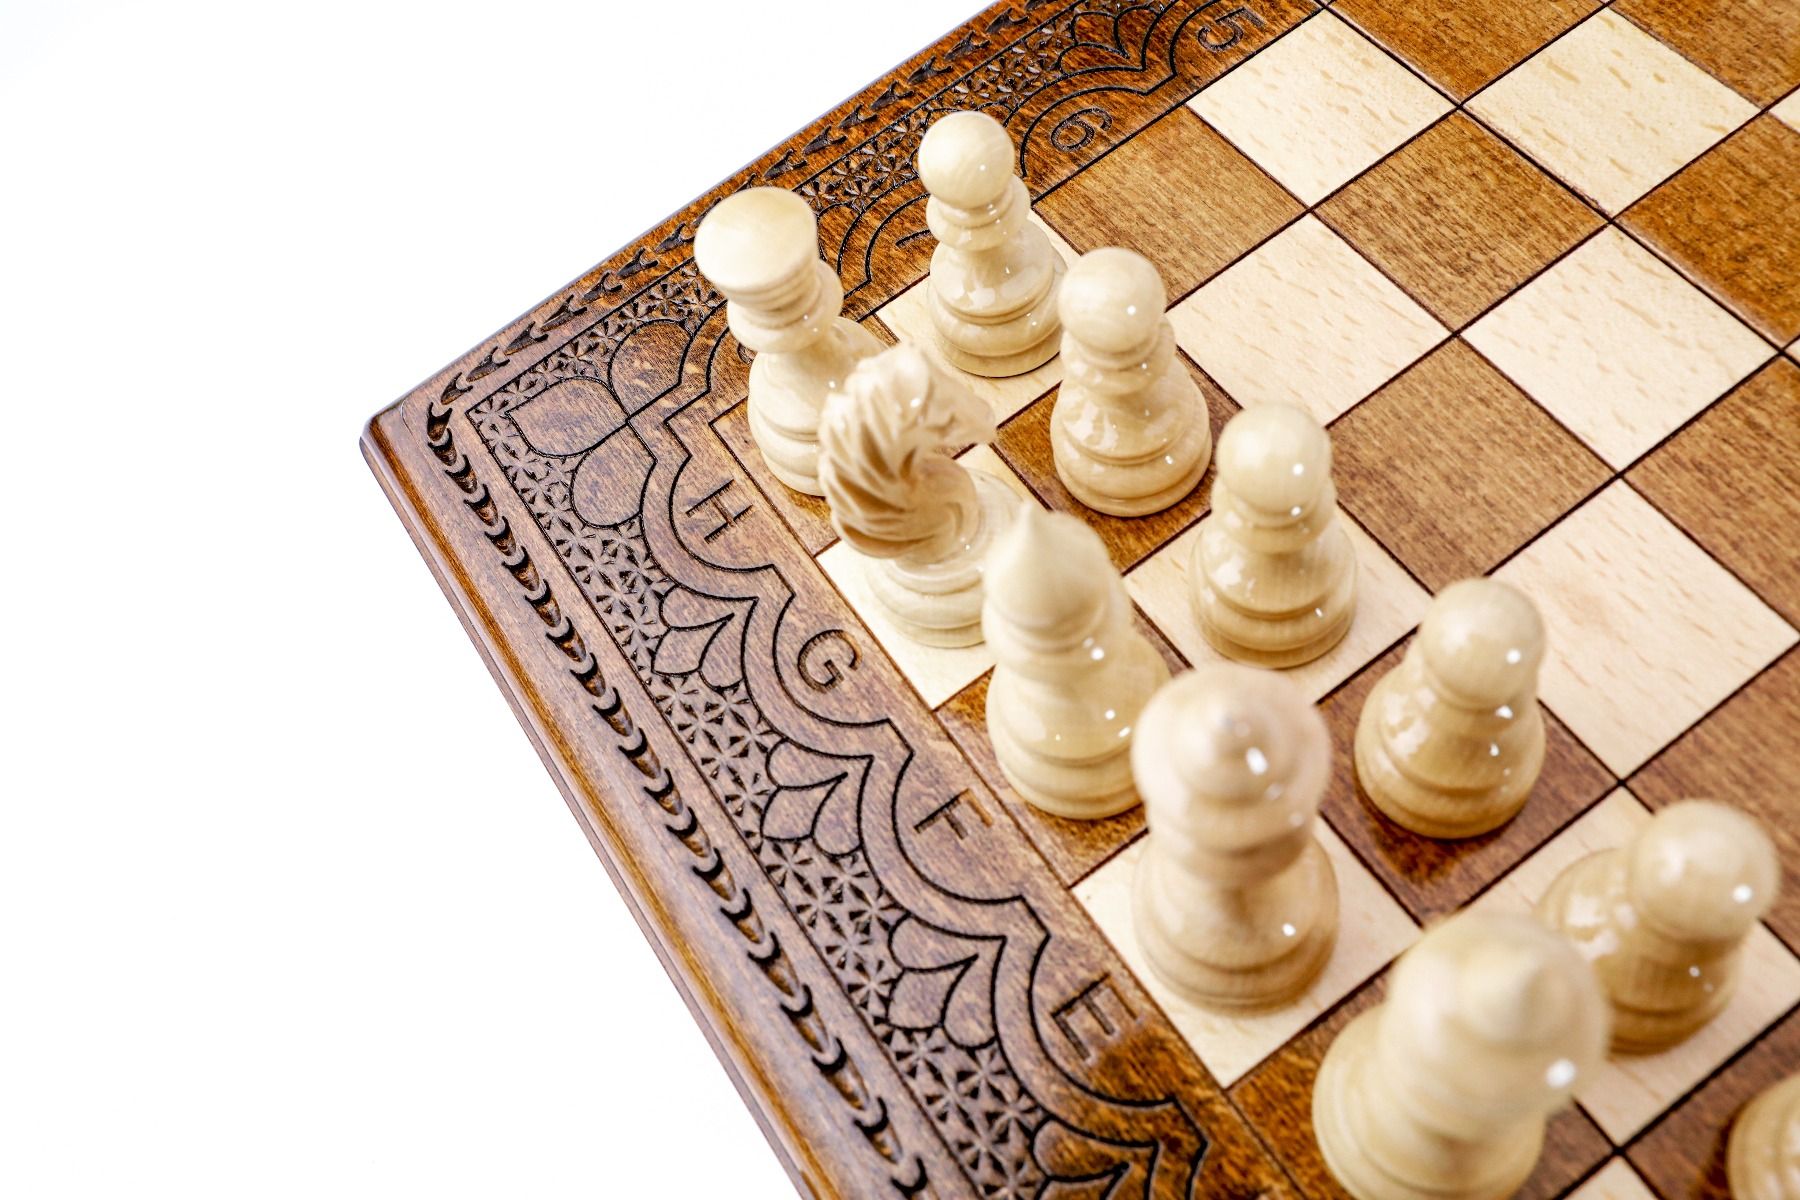 A testament to skilled artisanship, this unique wooden chess set invites players to explore the game within a framework of creativity, elegance, and tradition.